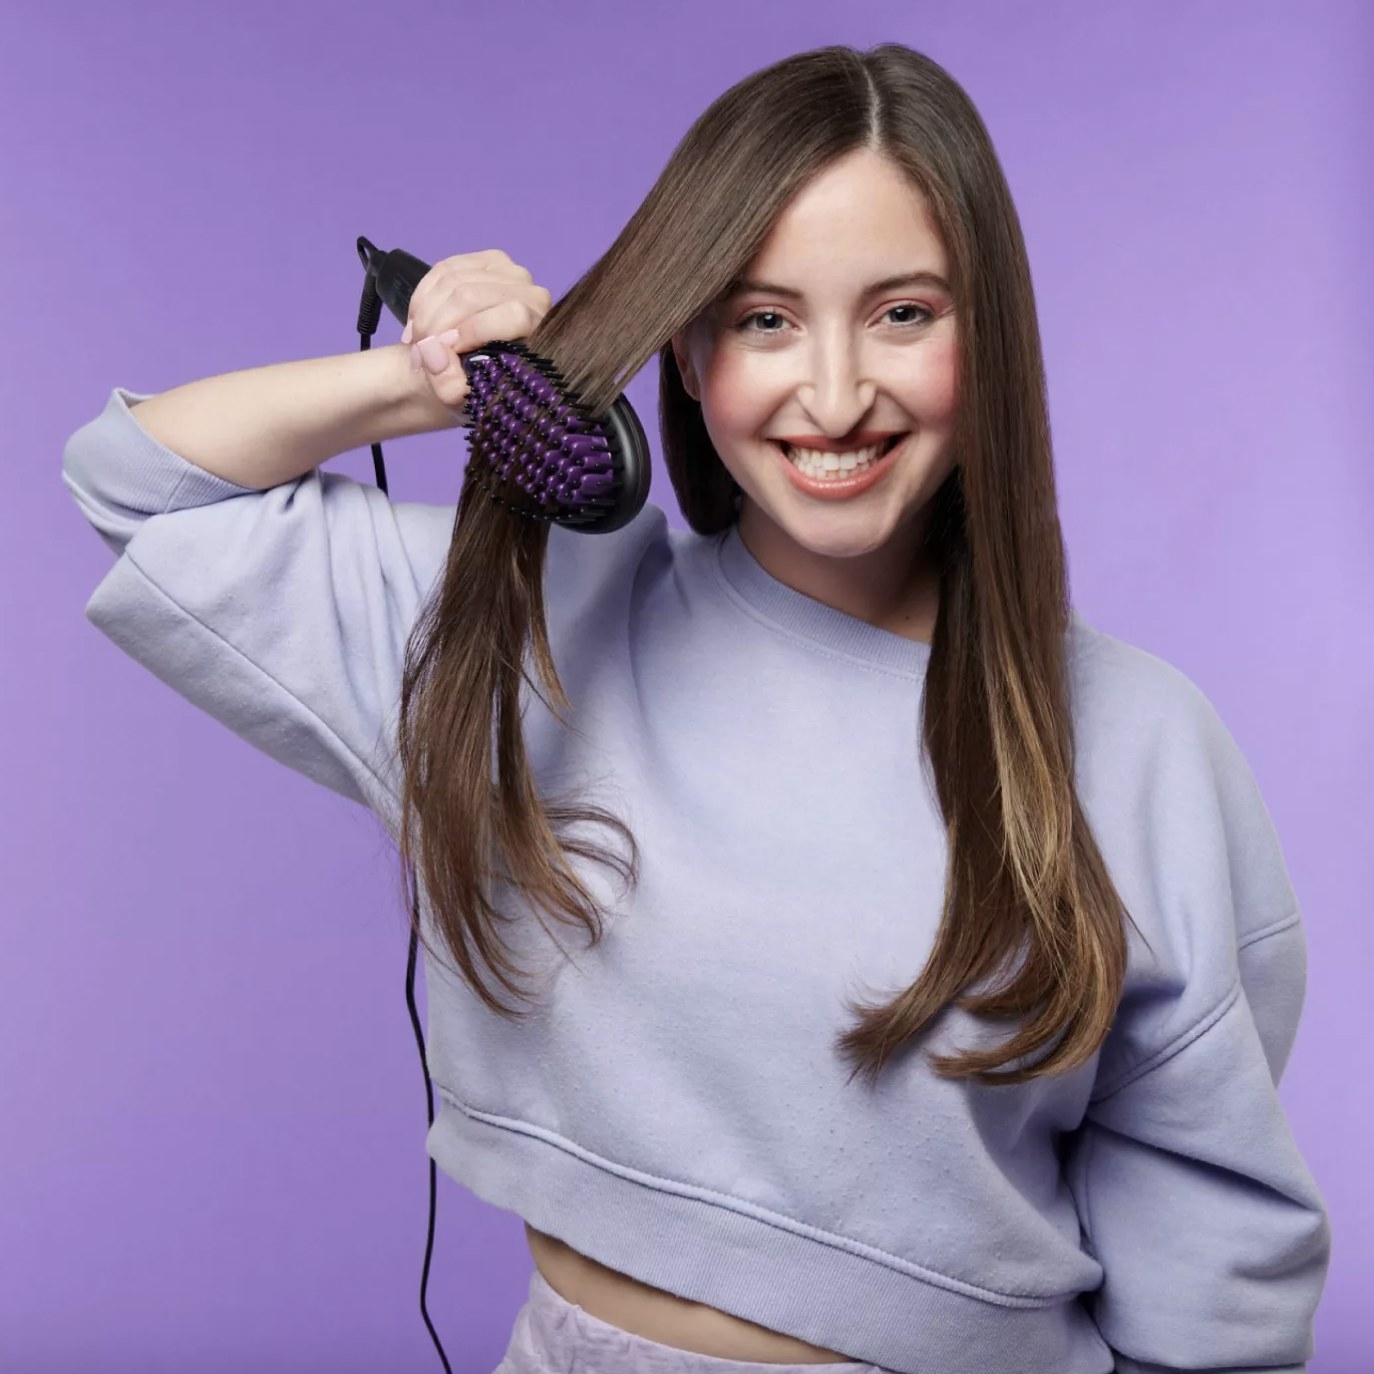 A woman straightening her hair with a straightener brush